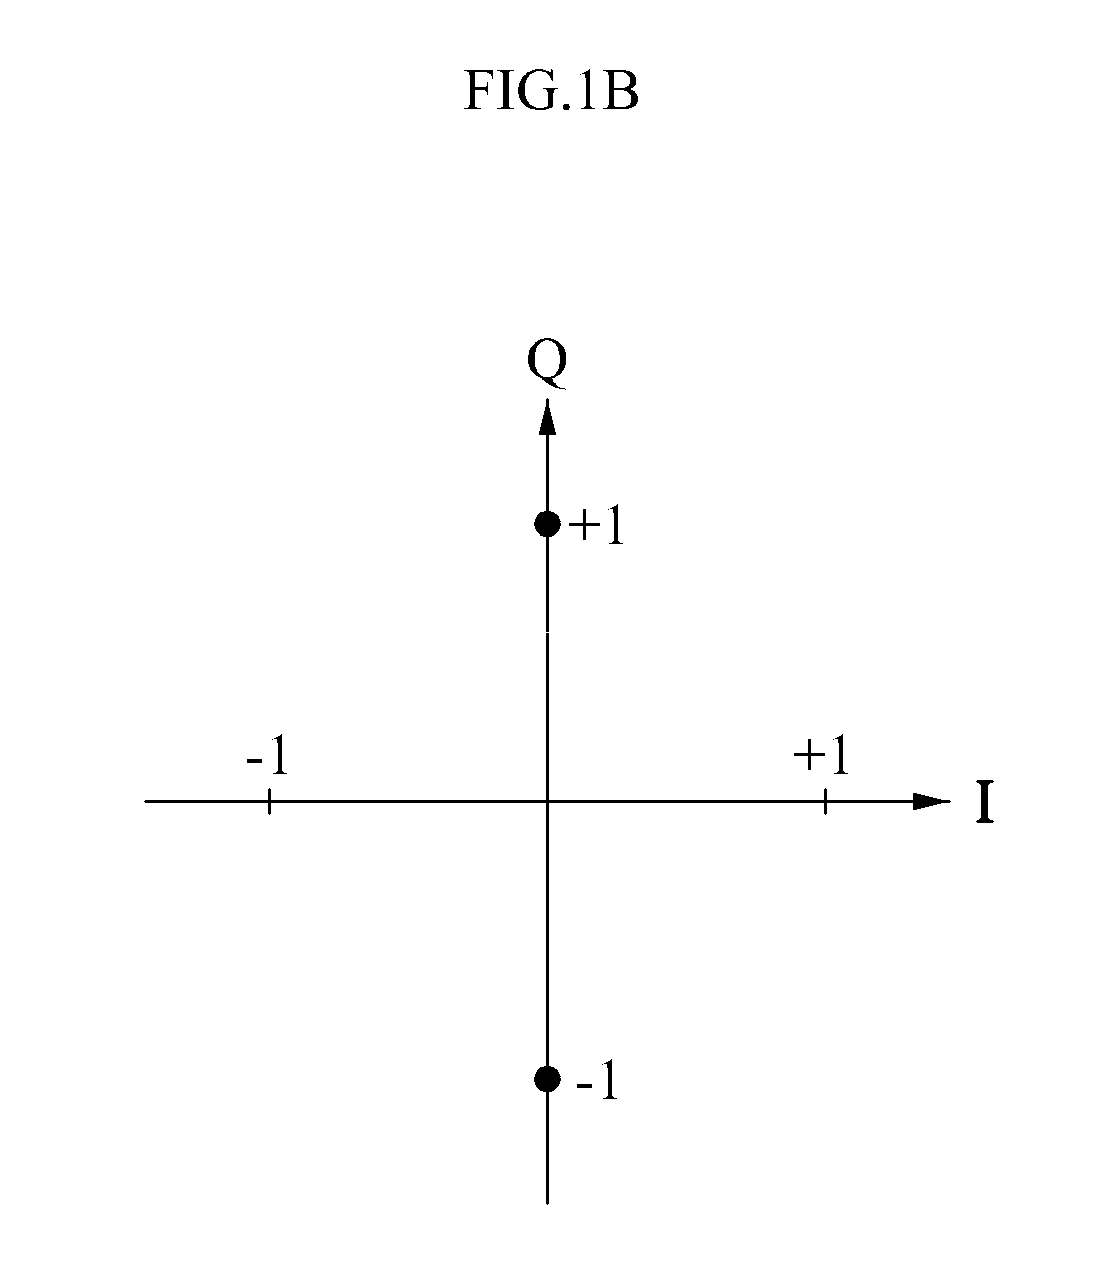 Data receiving apparatus for receiving data frame using constellation mapping scheme and data transmission apparatus for transmitting the data frame